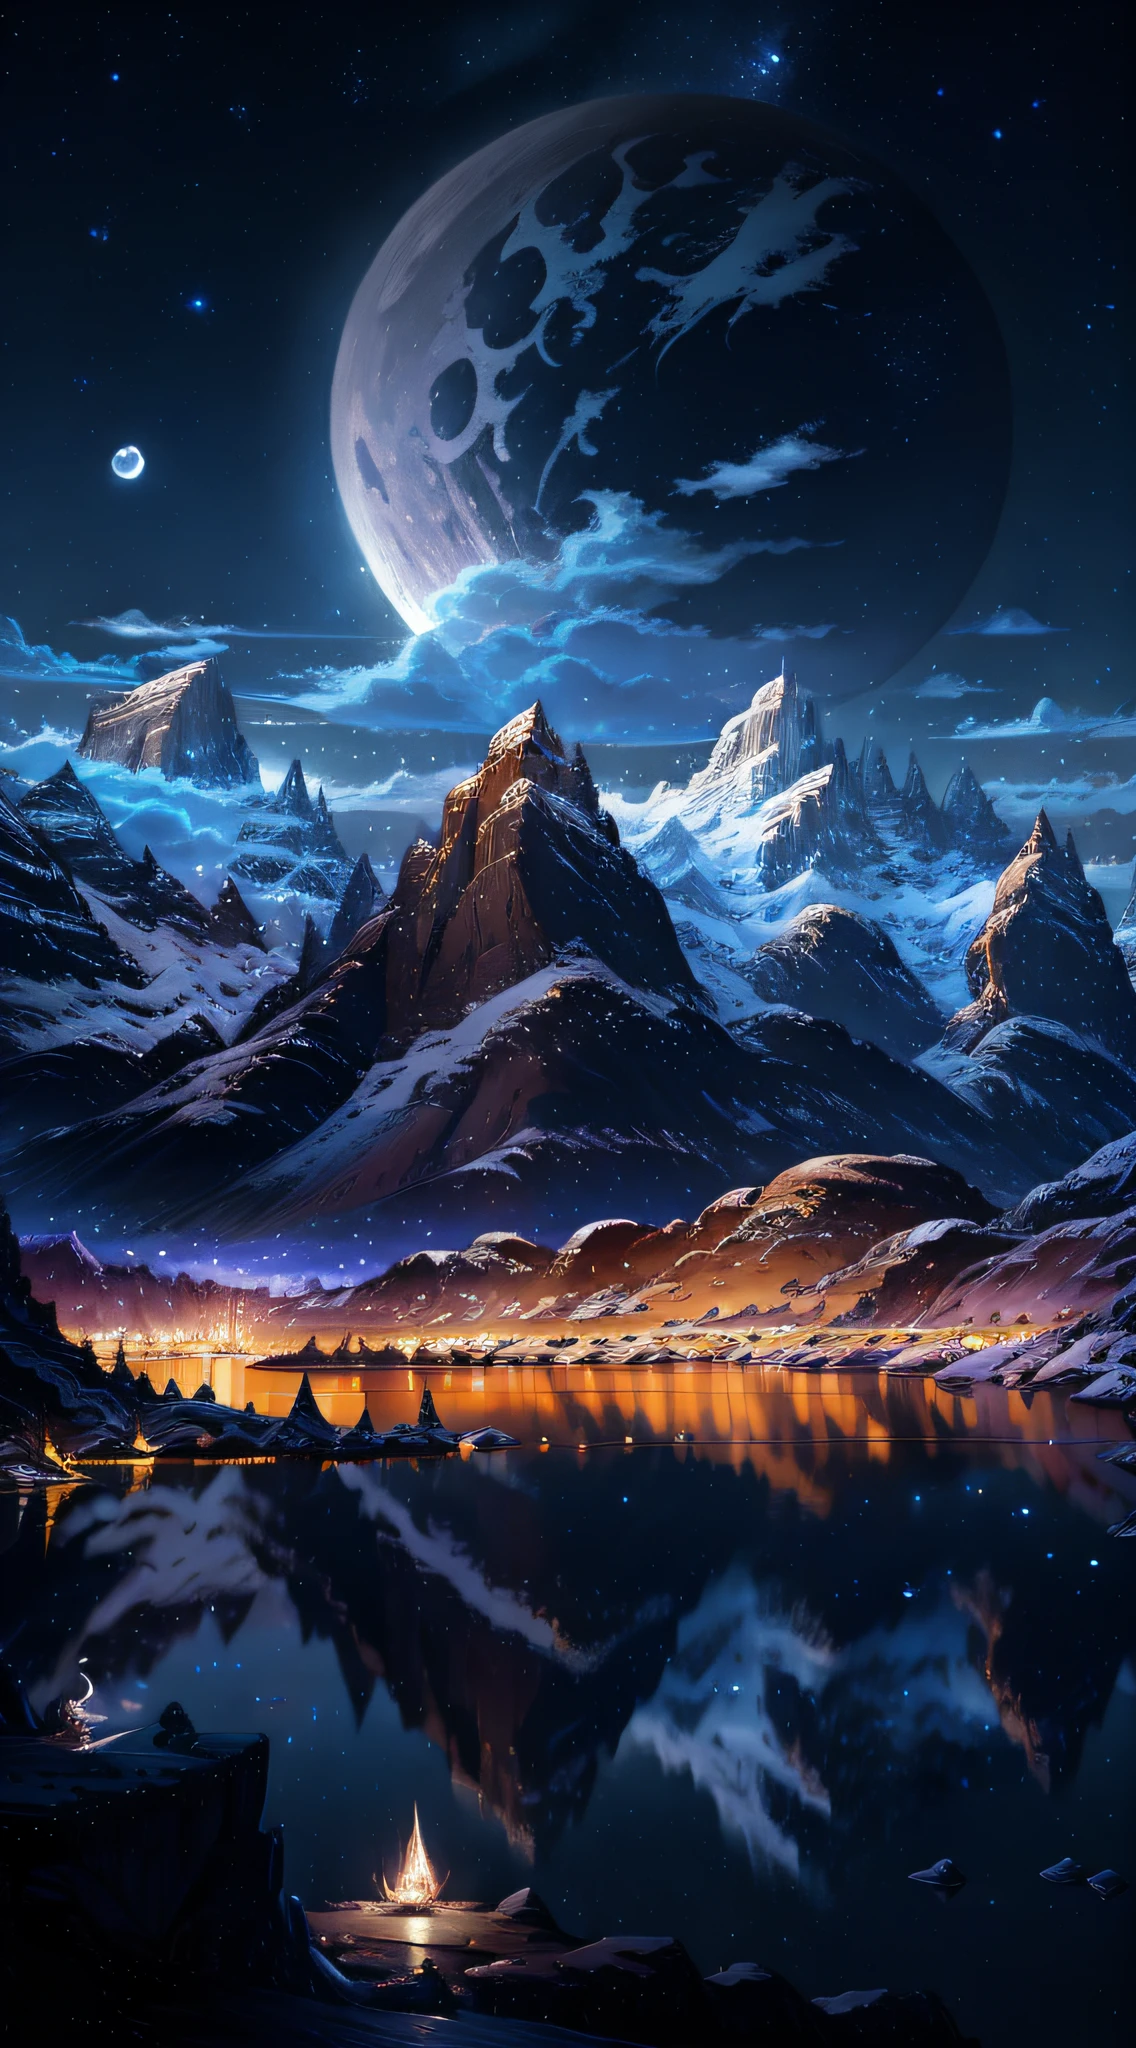 mountains and a lake with a moon in the sky, 4k highly detailed digital art, 4 k hd wallpaper very detailed, impressive fantasy landscape, sci-fi fantasy desktop wallpaper, unreal engine 4k wallpaper, 4k detailed digital art, sci-fi fantasy wallpaper, epic dreamlike fantasy landscape, 4k hd matte digital painting, 8k hd wallpaper digital art